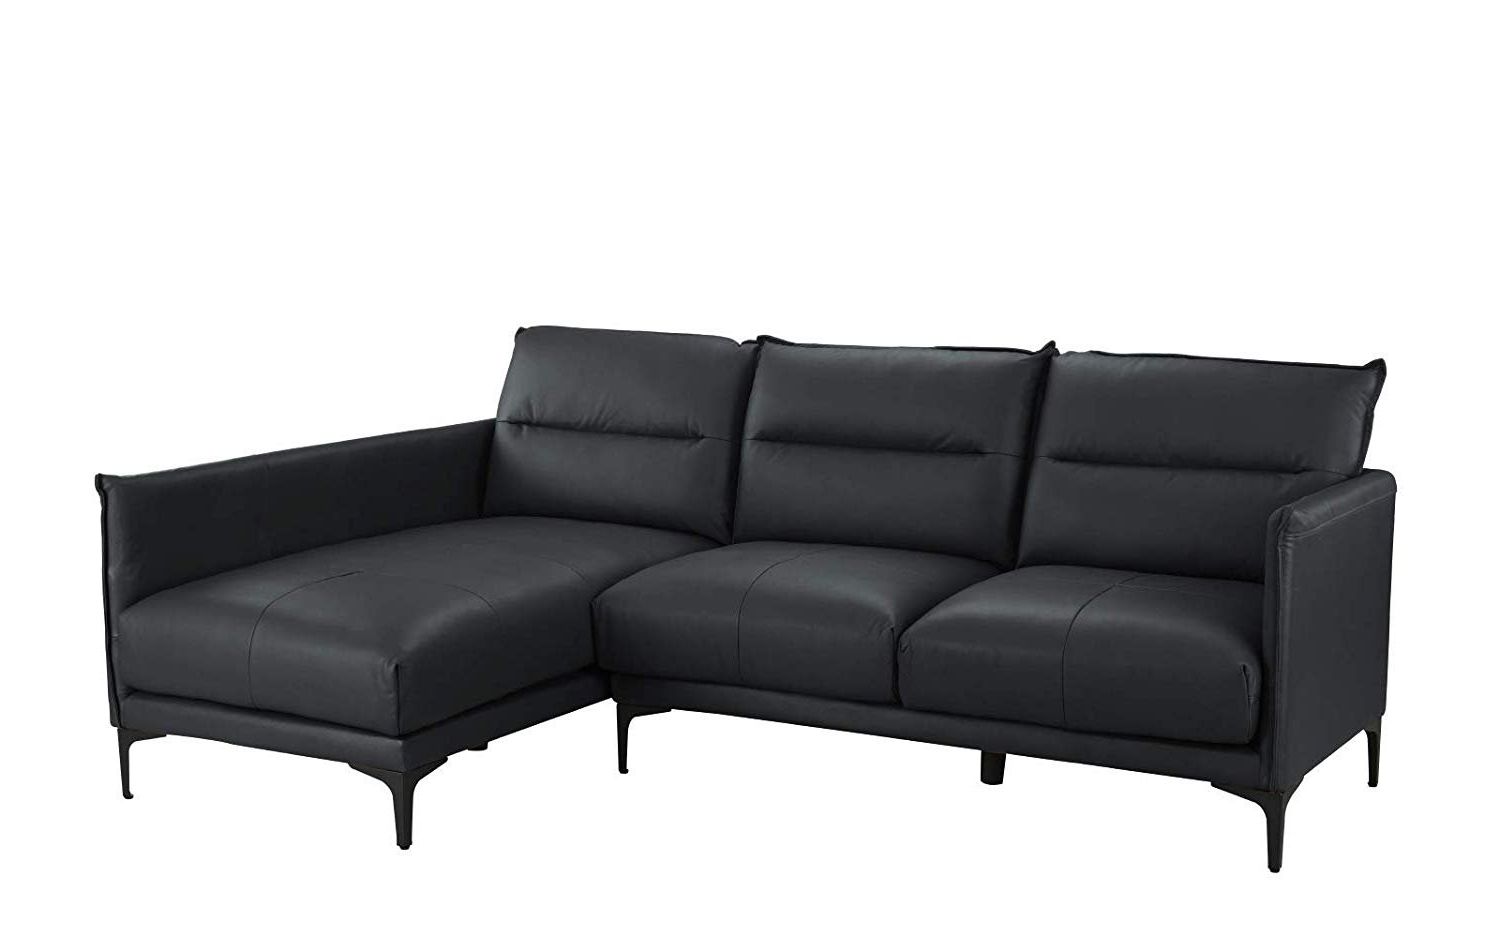 Fashionable Mid Century Sectional Sofa, L Shape Couch In Leather Match For Verona Mid Century Reversible Sectional Sofas (View 11 of 25)